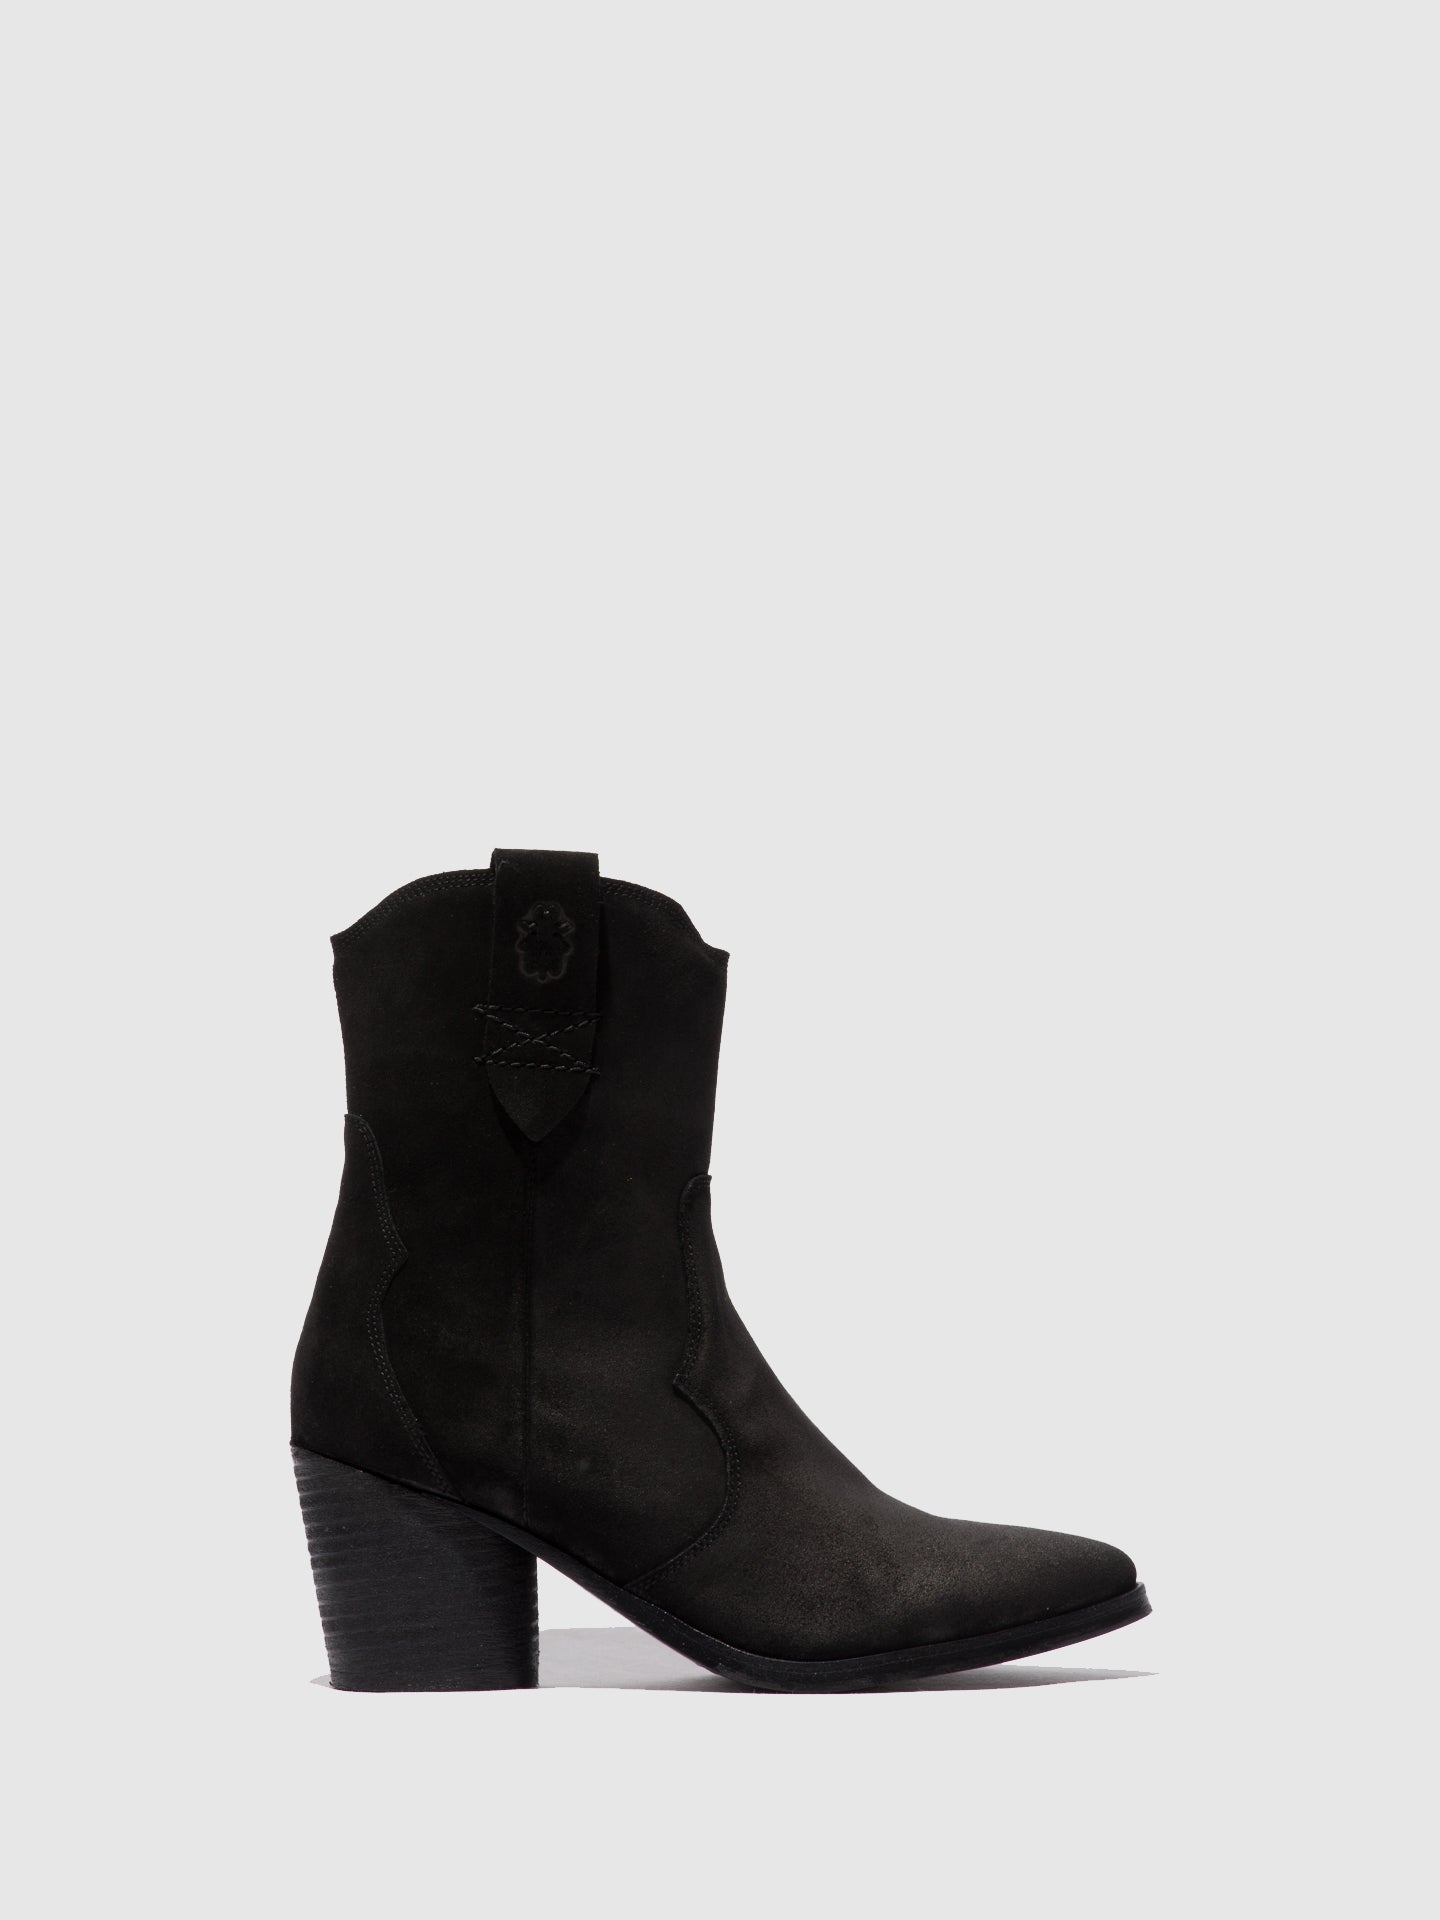 Fly London Zip Up Ankle Boots ALBA825FLY SUEDE BLACK